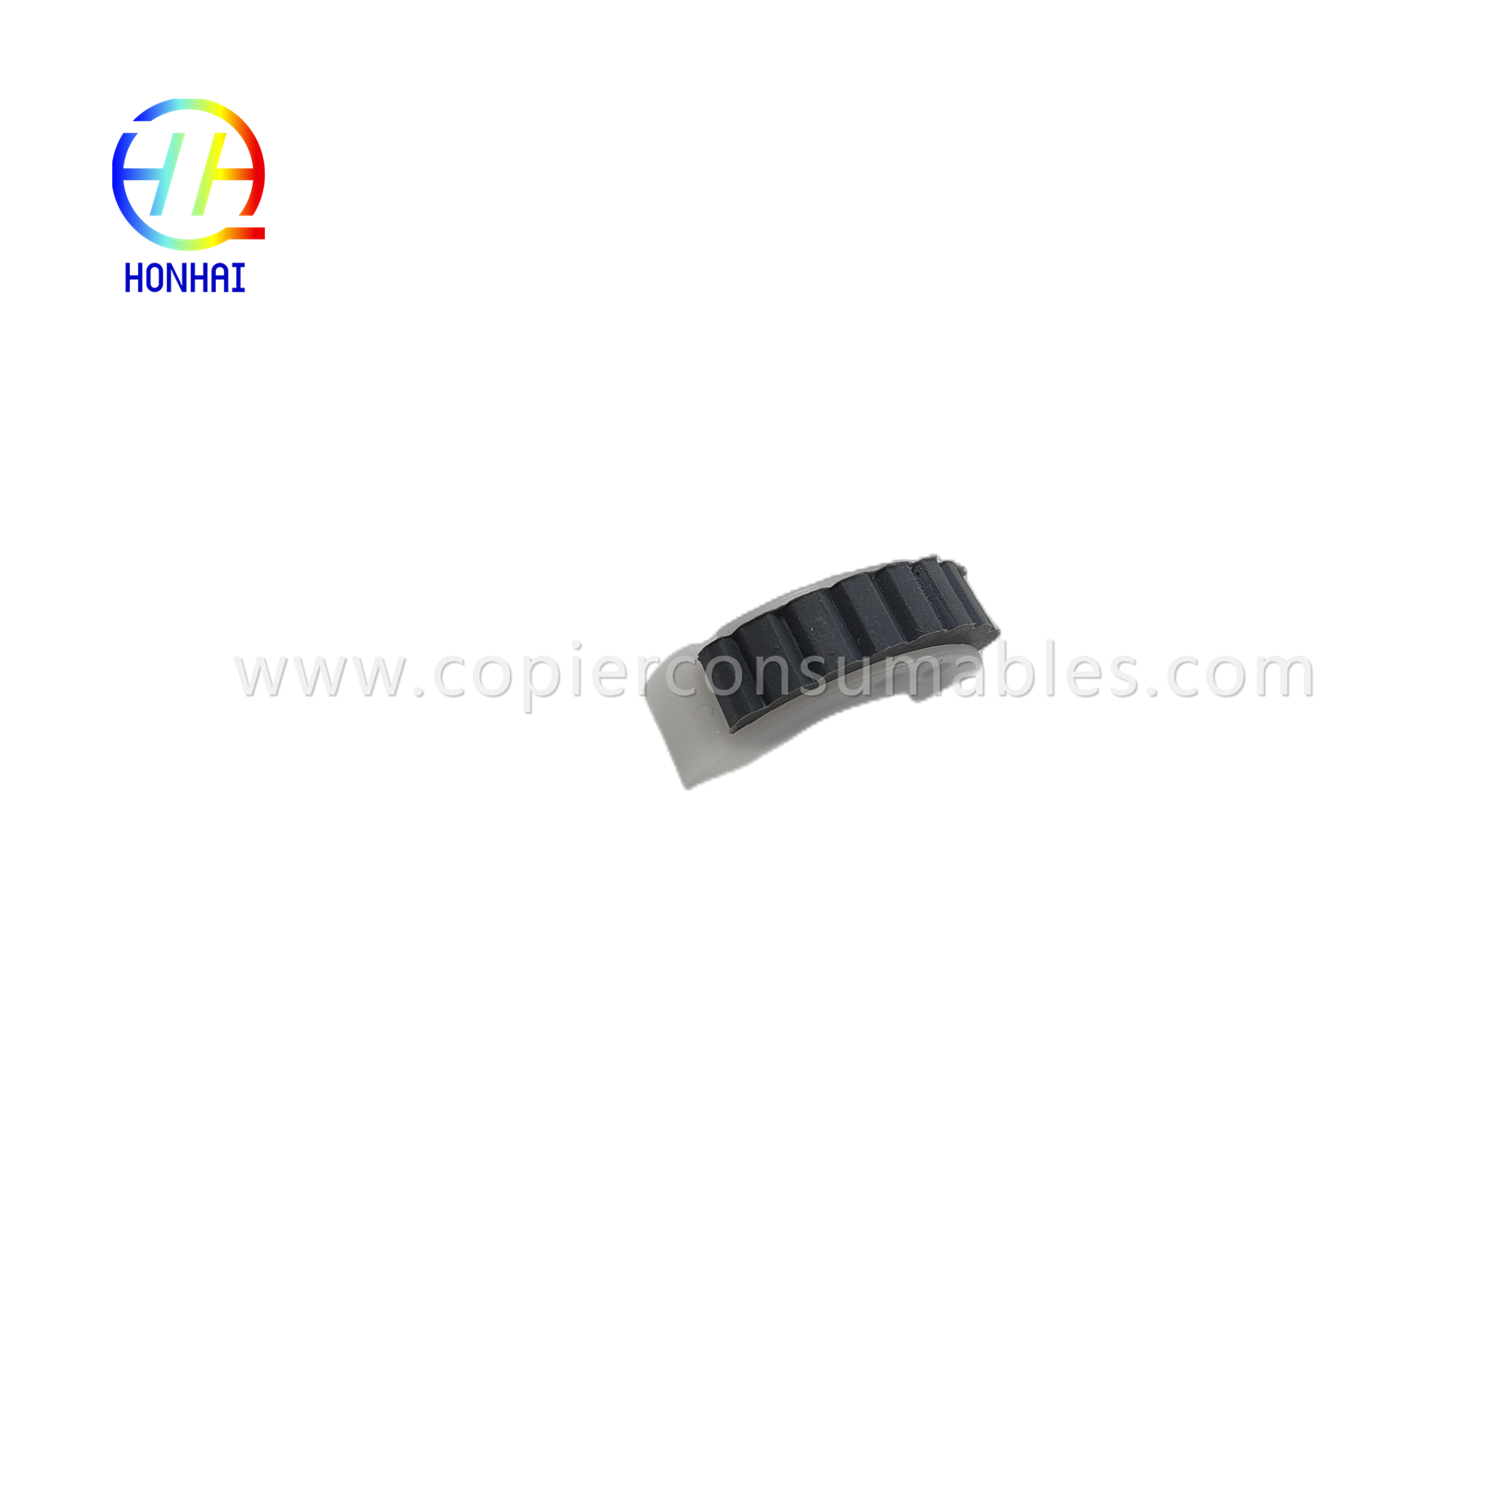 Paper Feed Separion Pickup Roller for Canon iR 2016 2018 2020 2320 1600 2318 2420 2600 FB4-9817-030 FB4-9817-000 FF6-1621-000 OEM